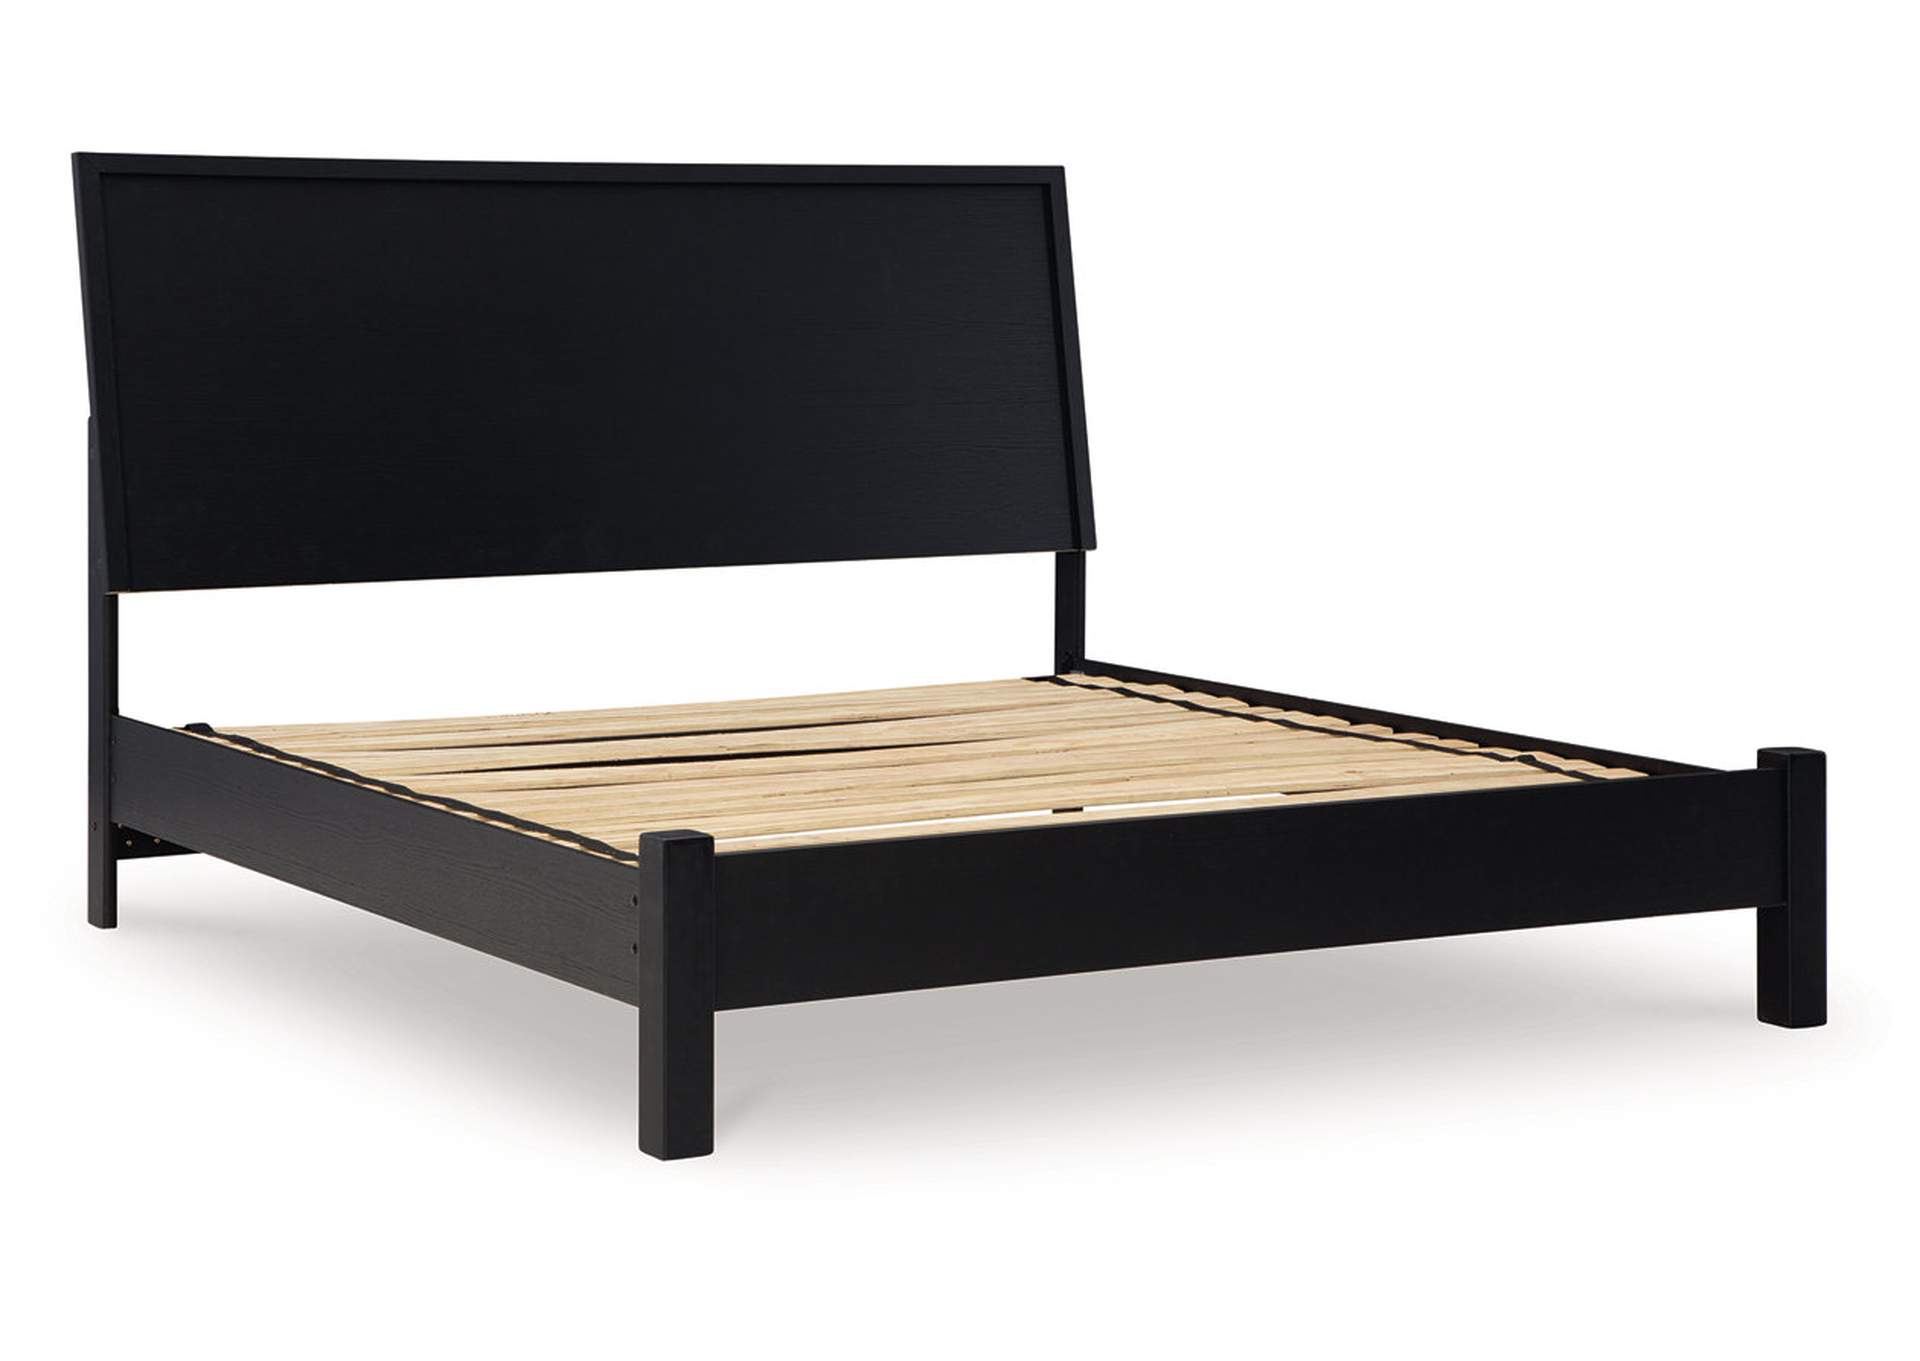 Danziar King Panel Bed,Signature Design By Ashley